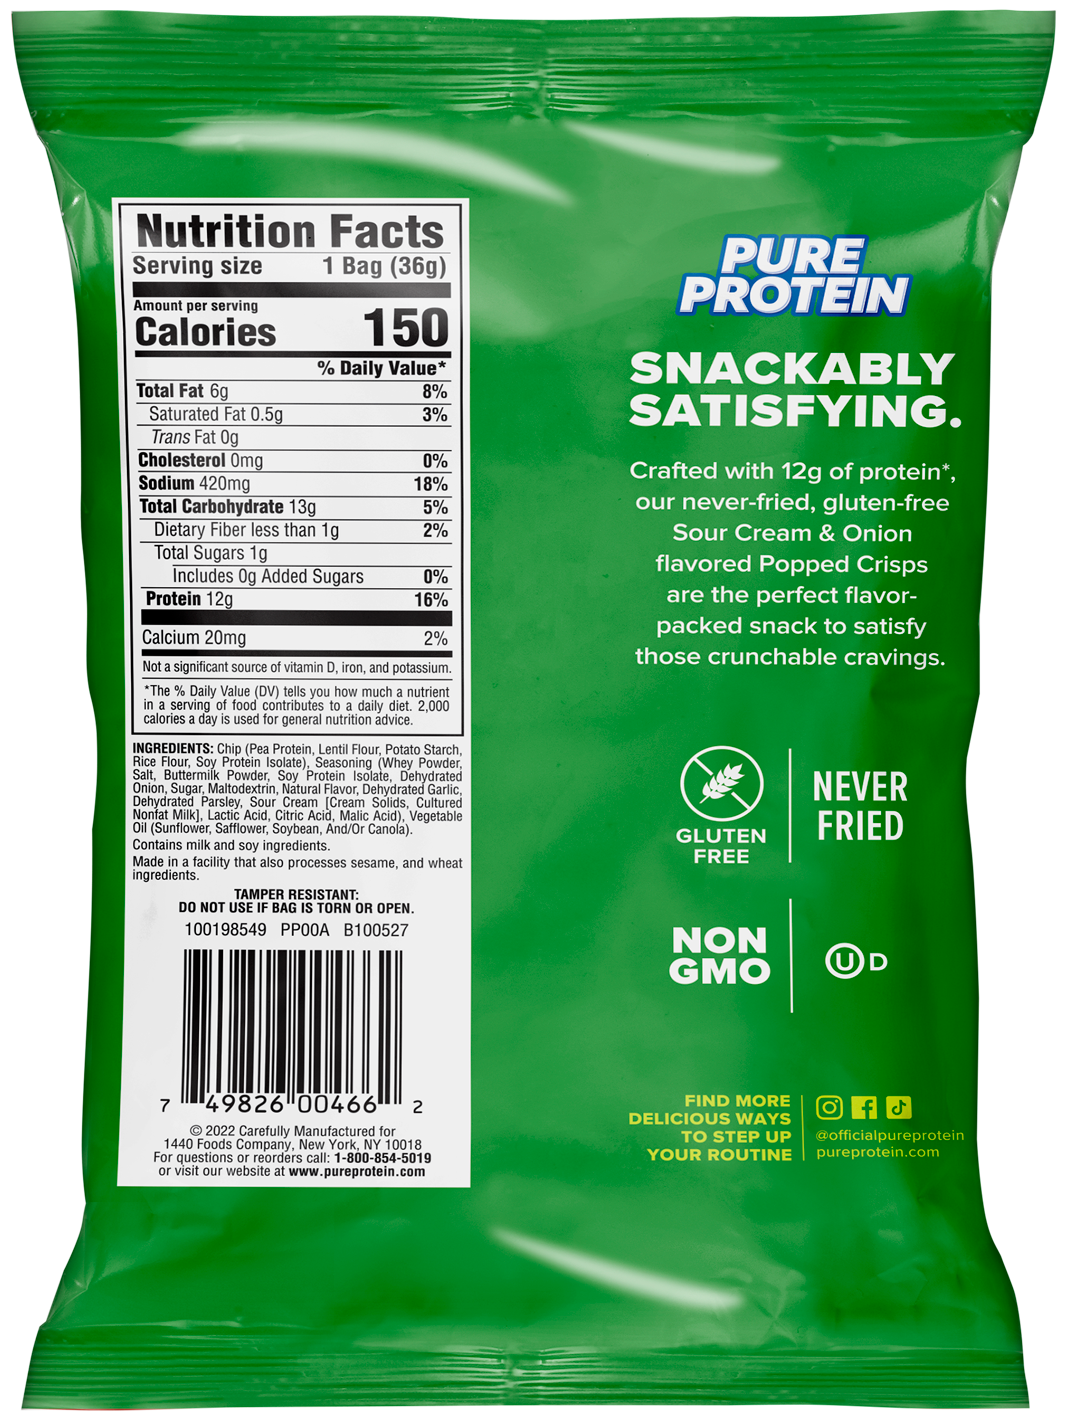 Popped Crisps Variety Pack-Sour Cream & Onion Nutrition Facts package back